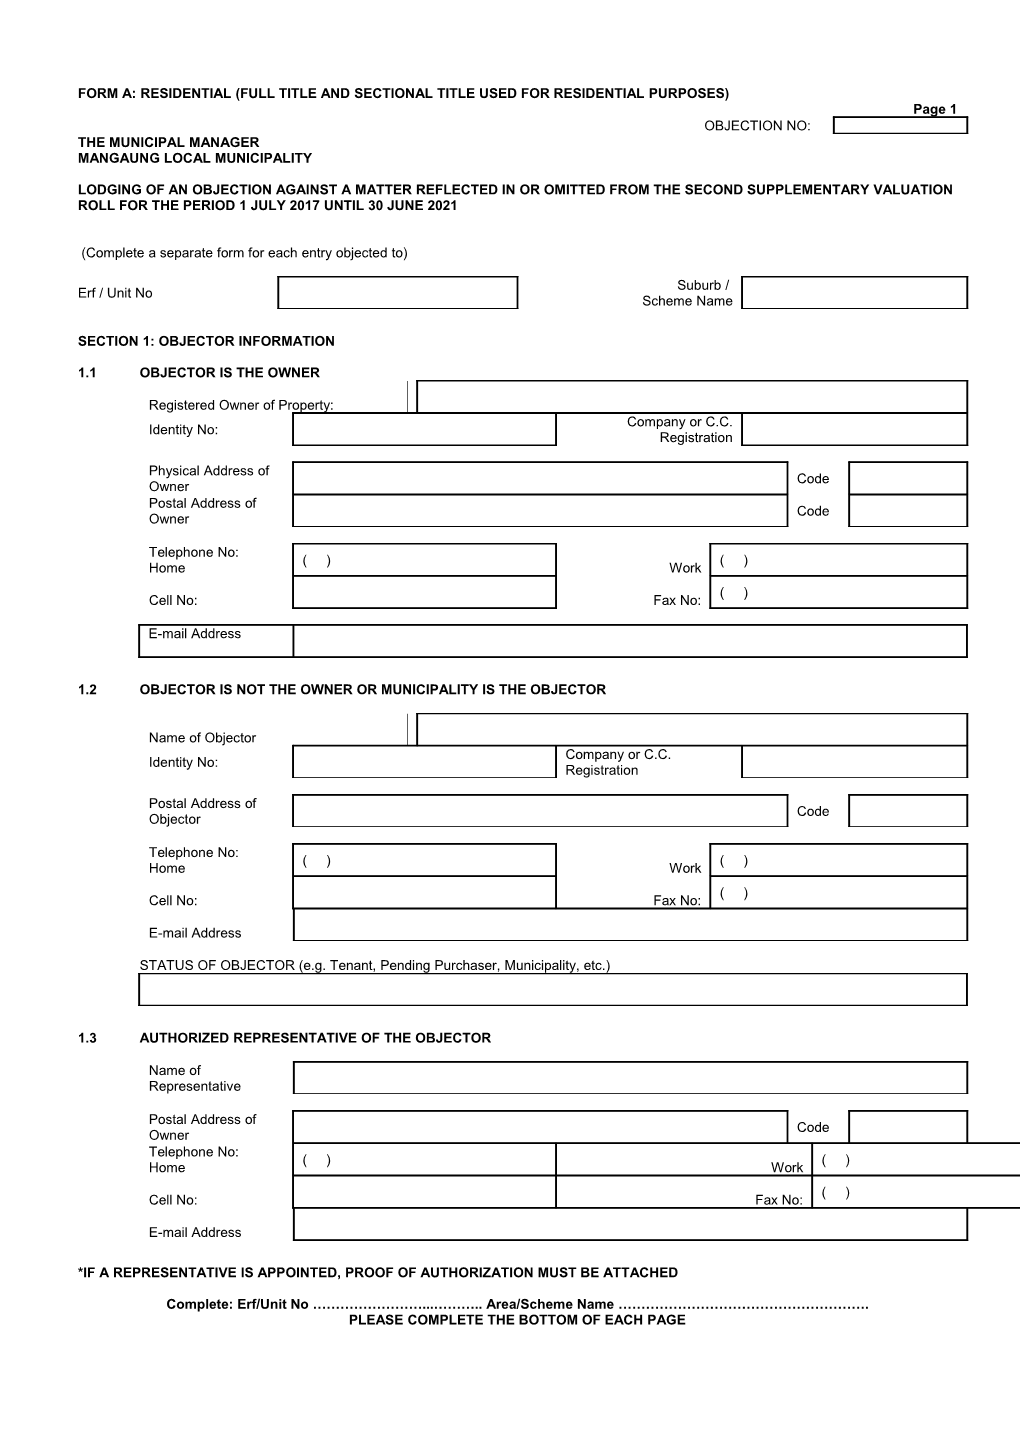 FORM A: RESIDENTIAL (FULL TITLE and SECTIONAL TITLE USED for RESIDENTIAL PURPOSES) Page 1